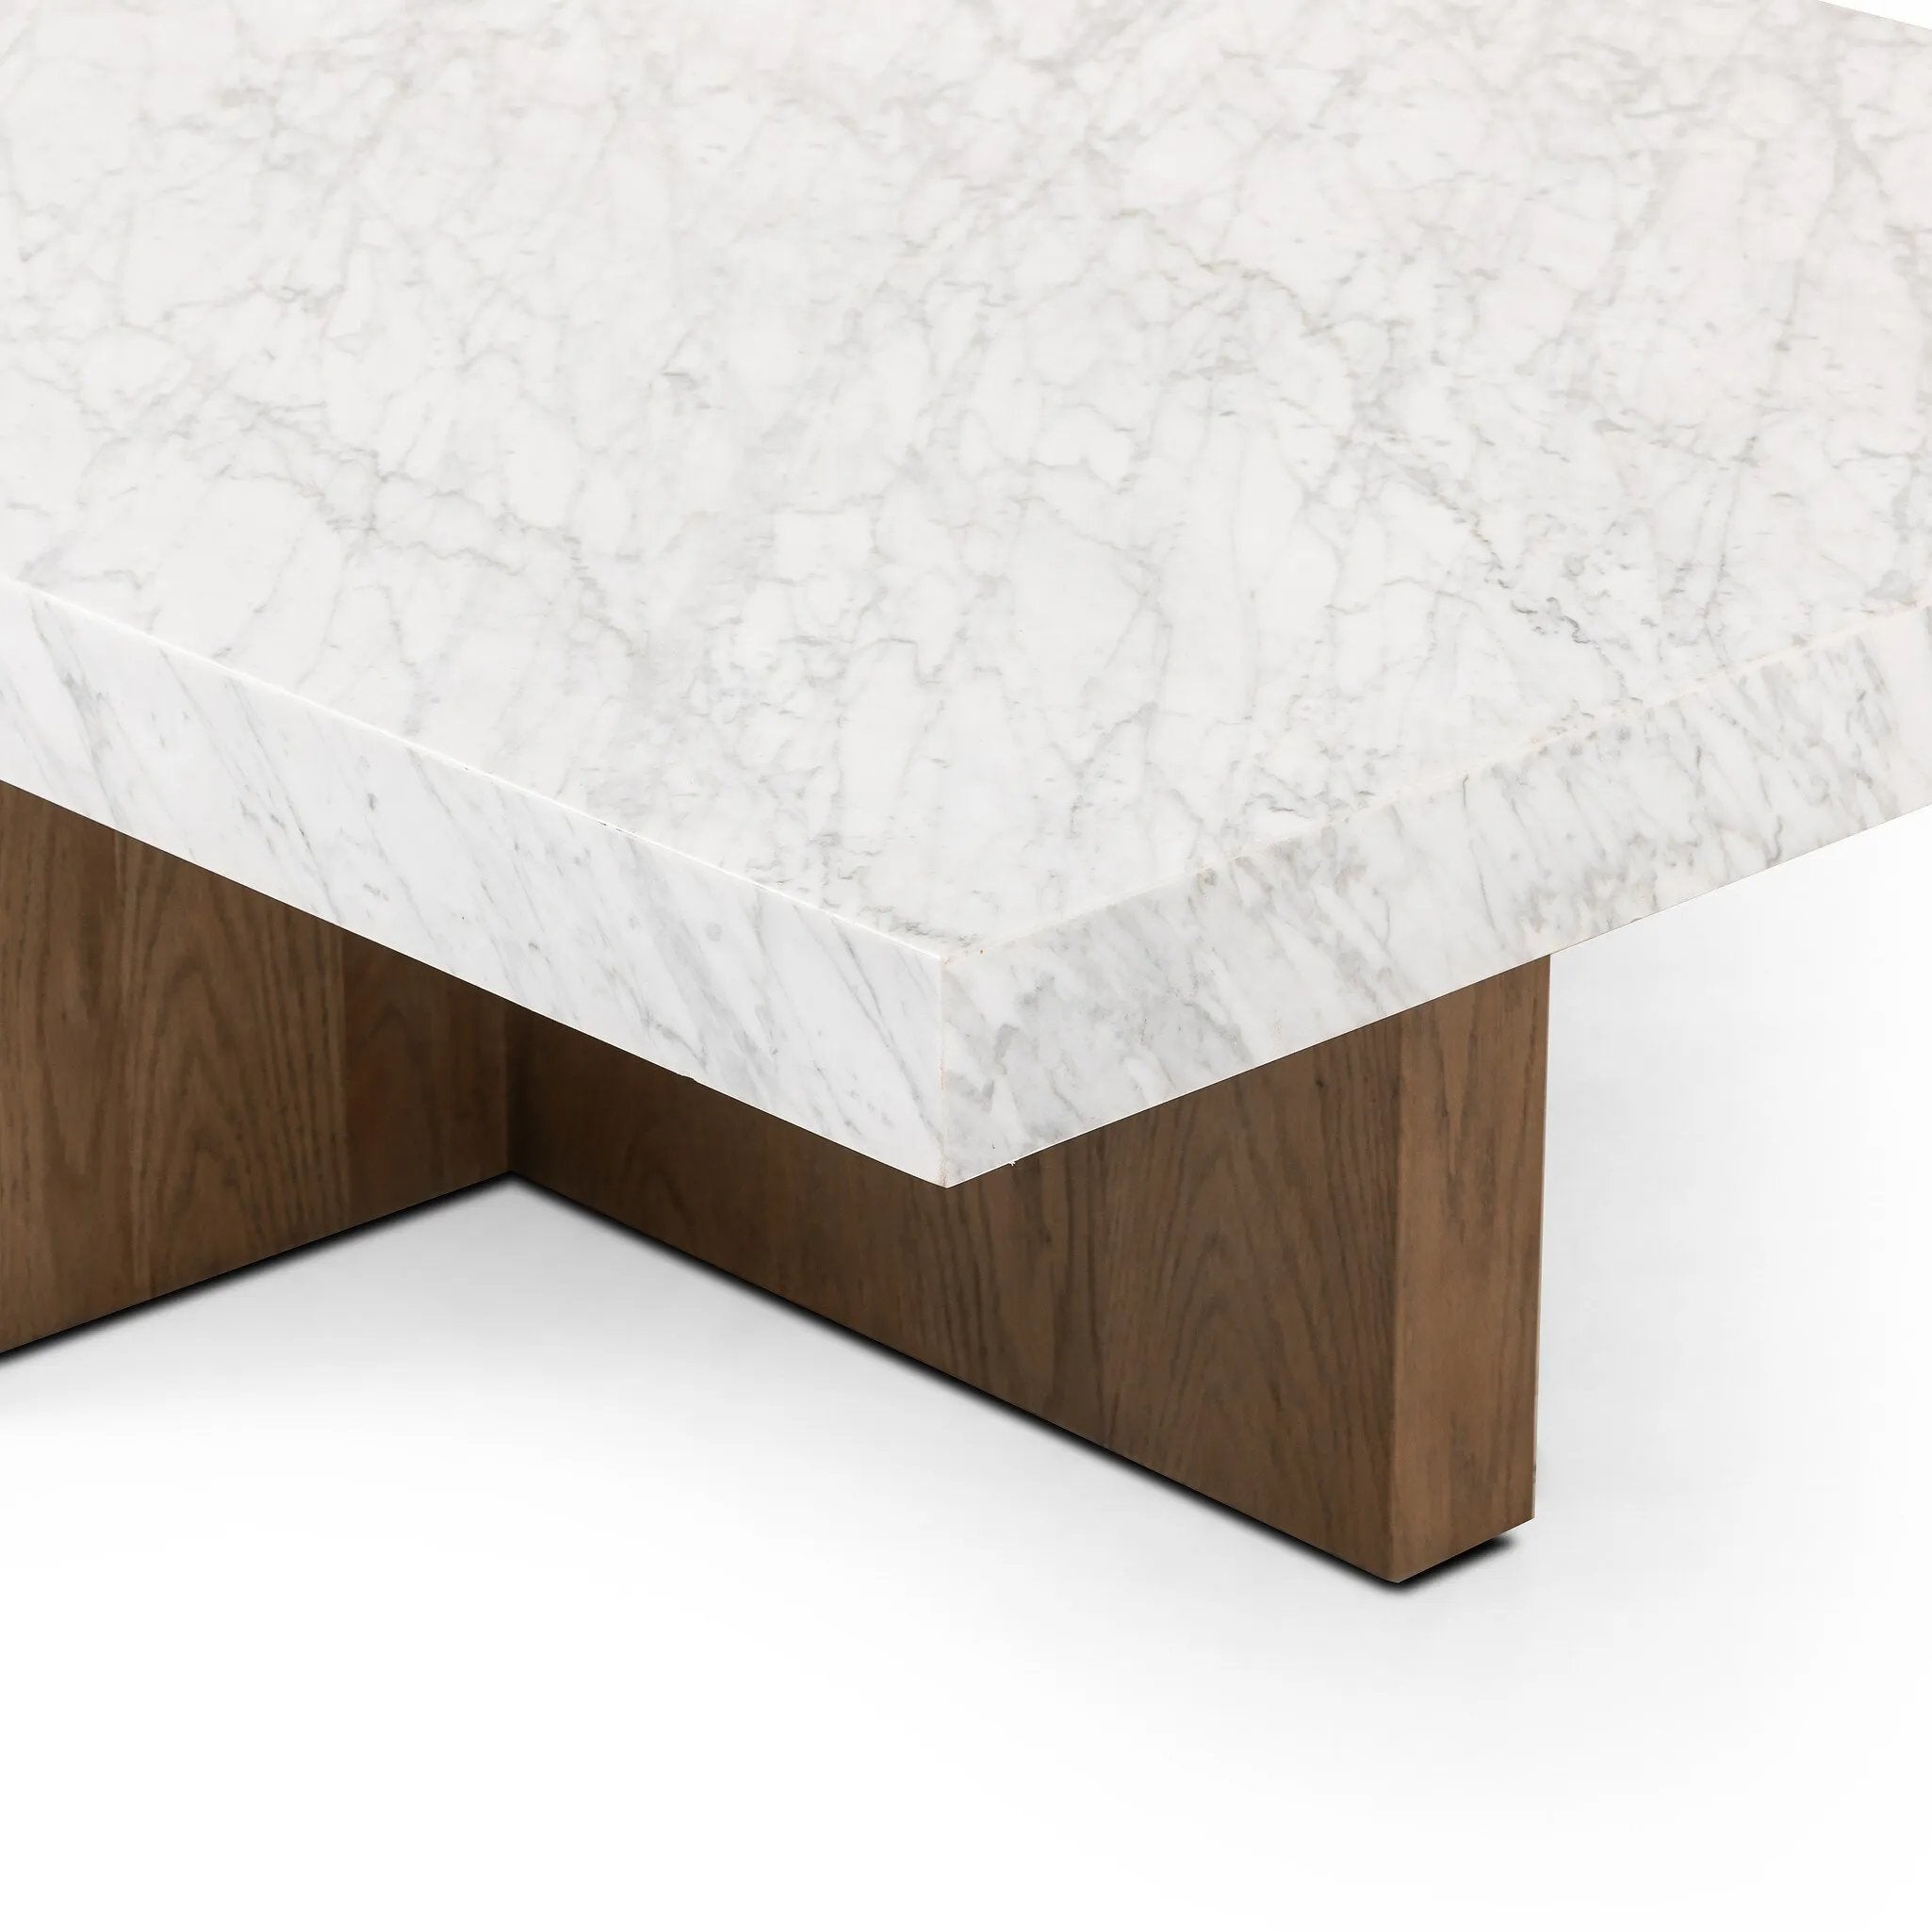 Structured lines and wide proportions fuse for a mixed material coffee table of smoked oak and polished marble.Collection: Hughe Amethyst Home provides interior design, new home construction design consulting, vintage area rugs, and lighting in the Newport Beach metro area.